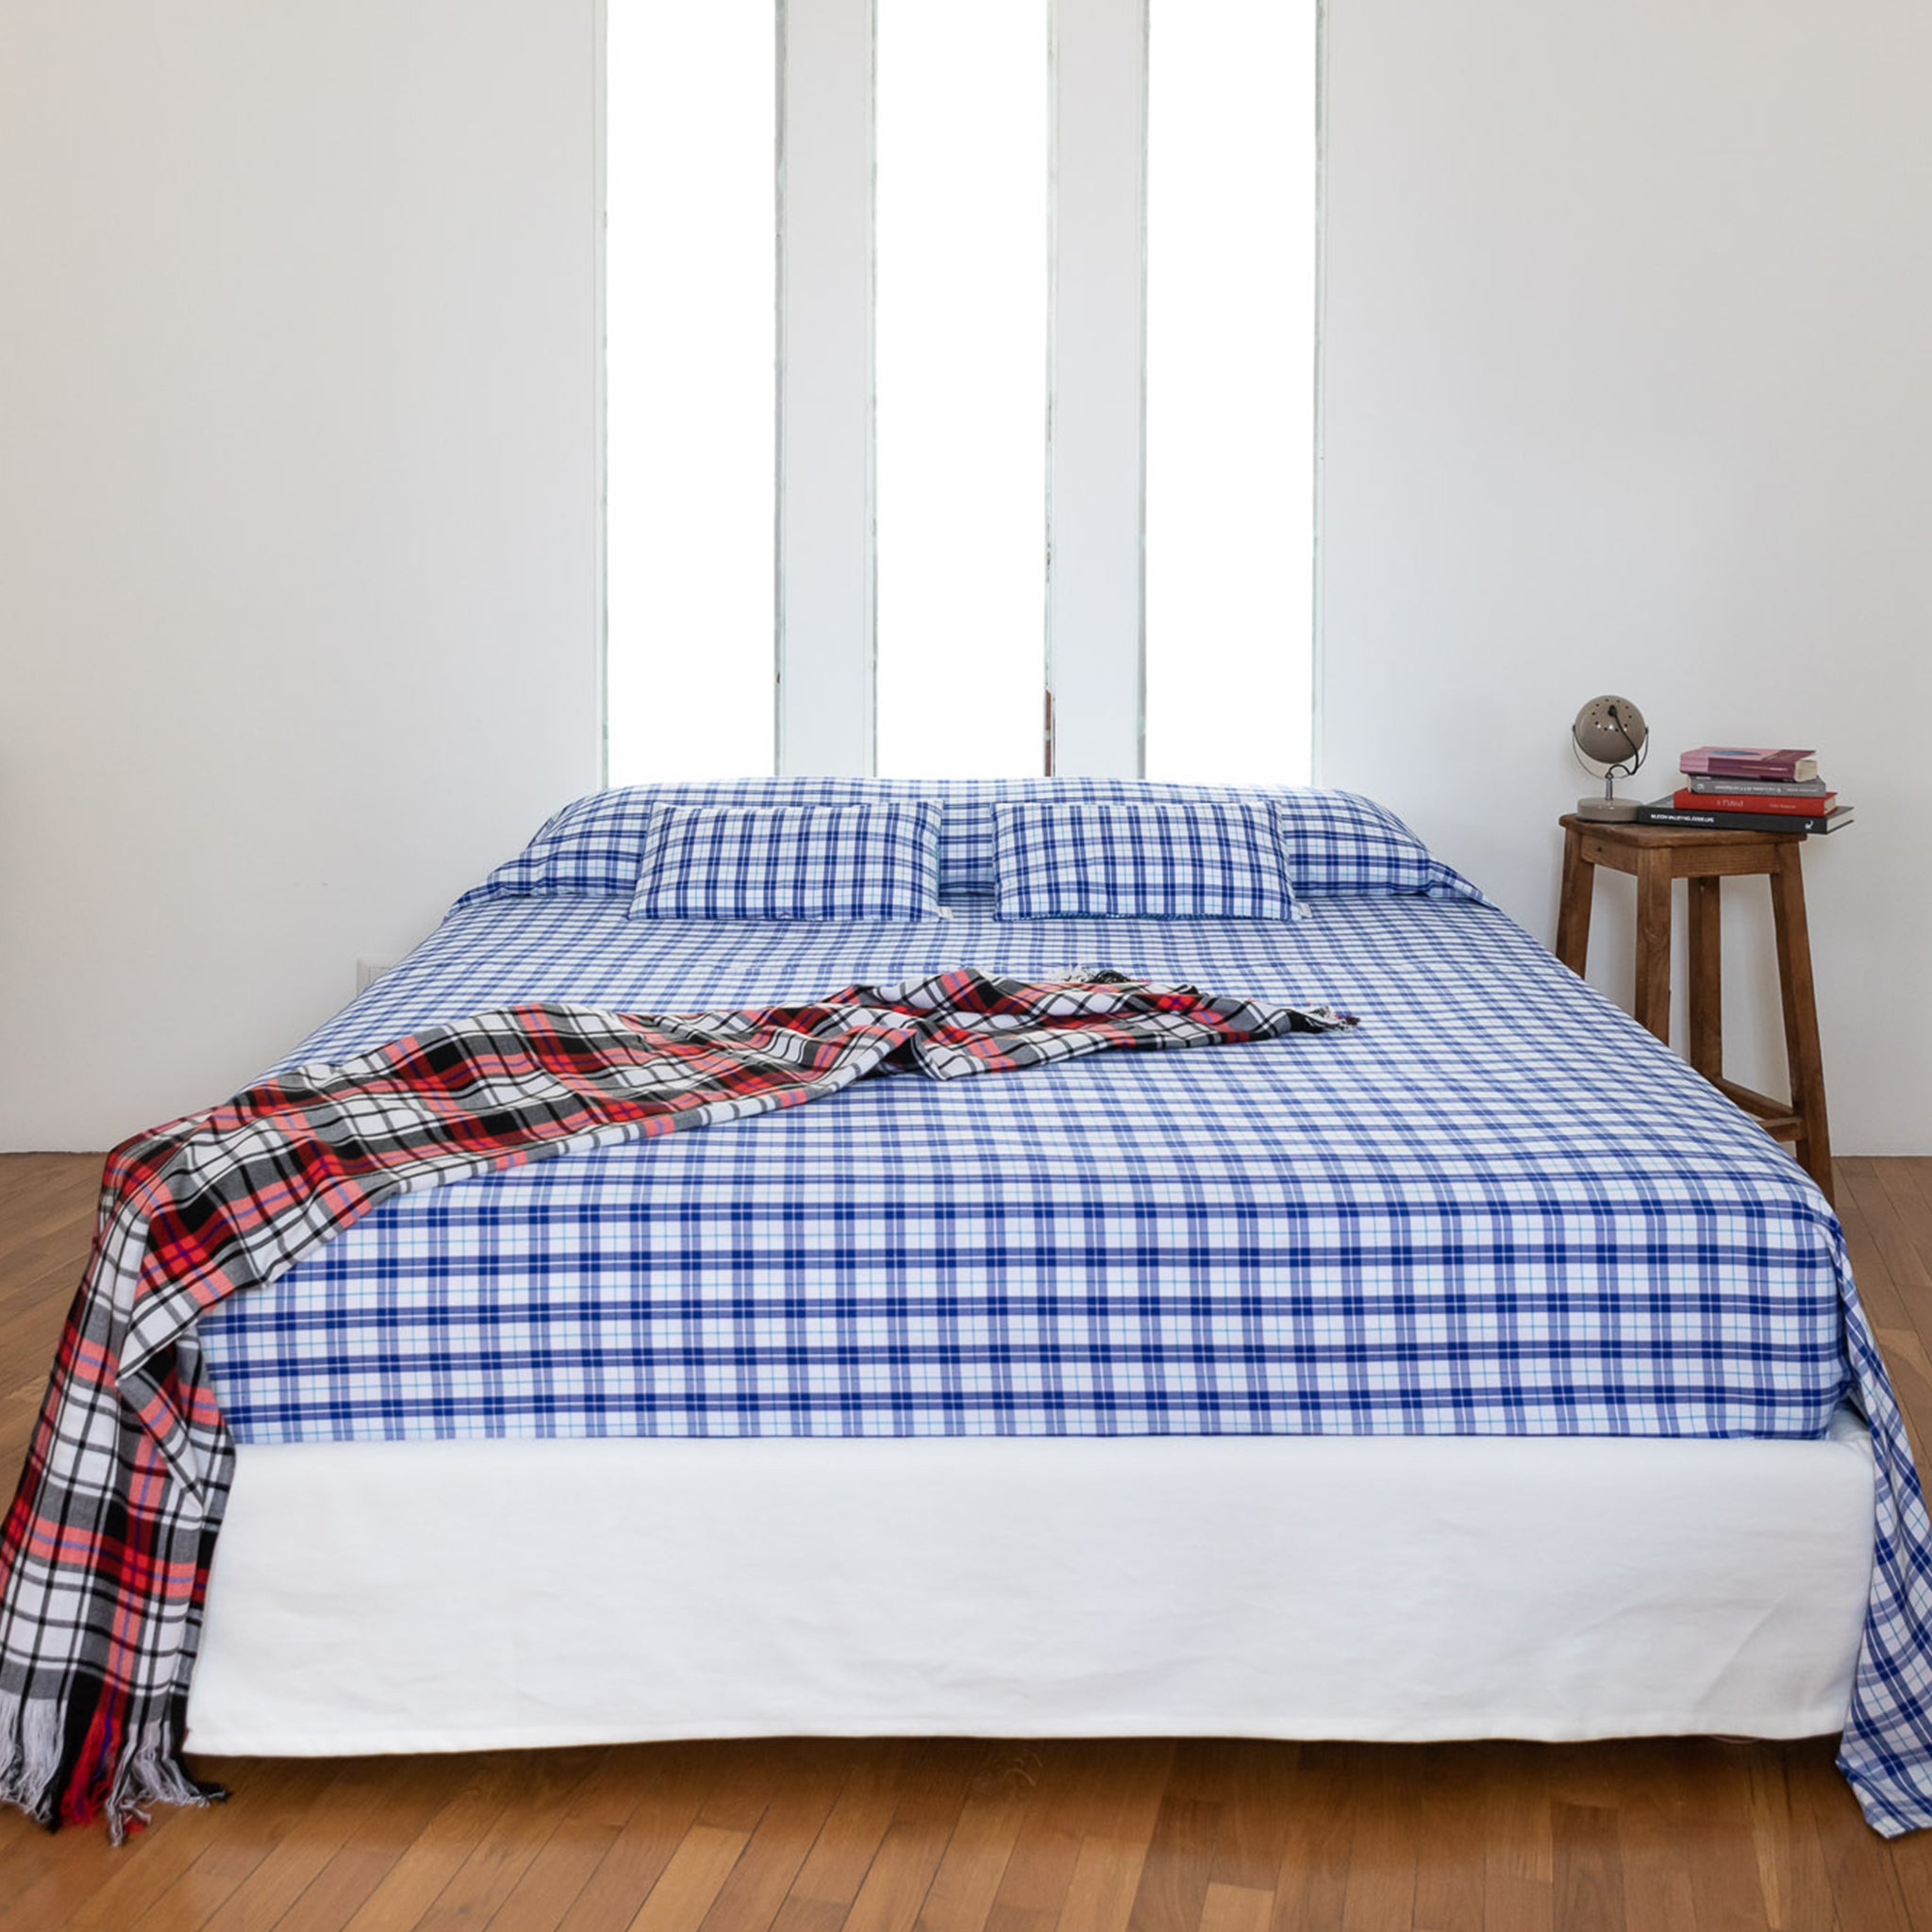 Double bed with Maasai checkered bedspread in blue&white and matching plaid